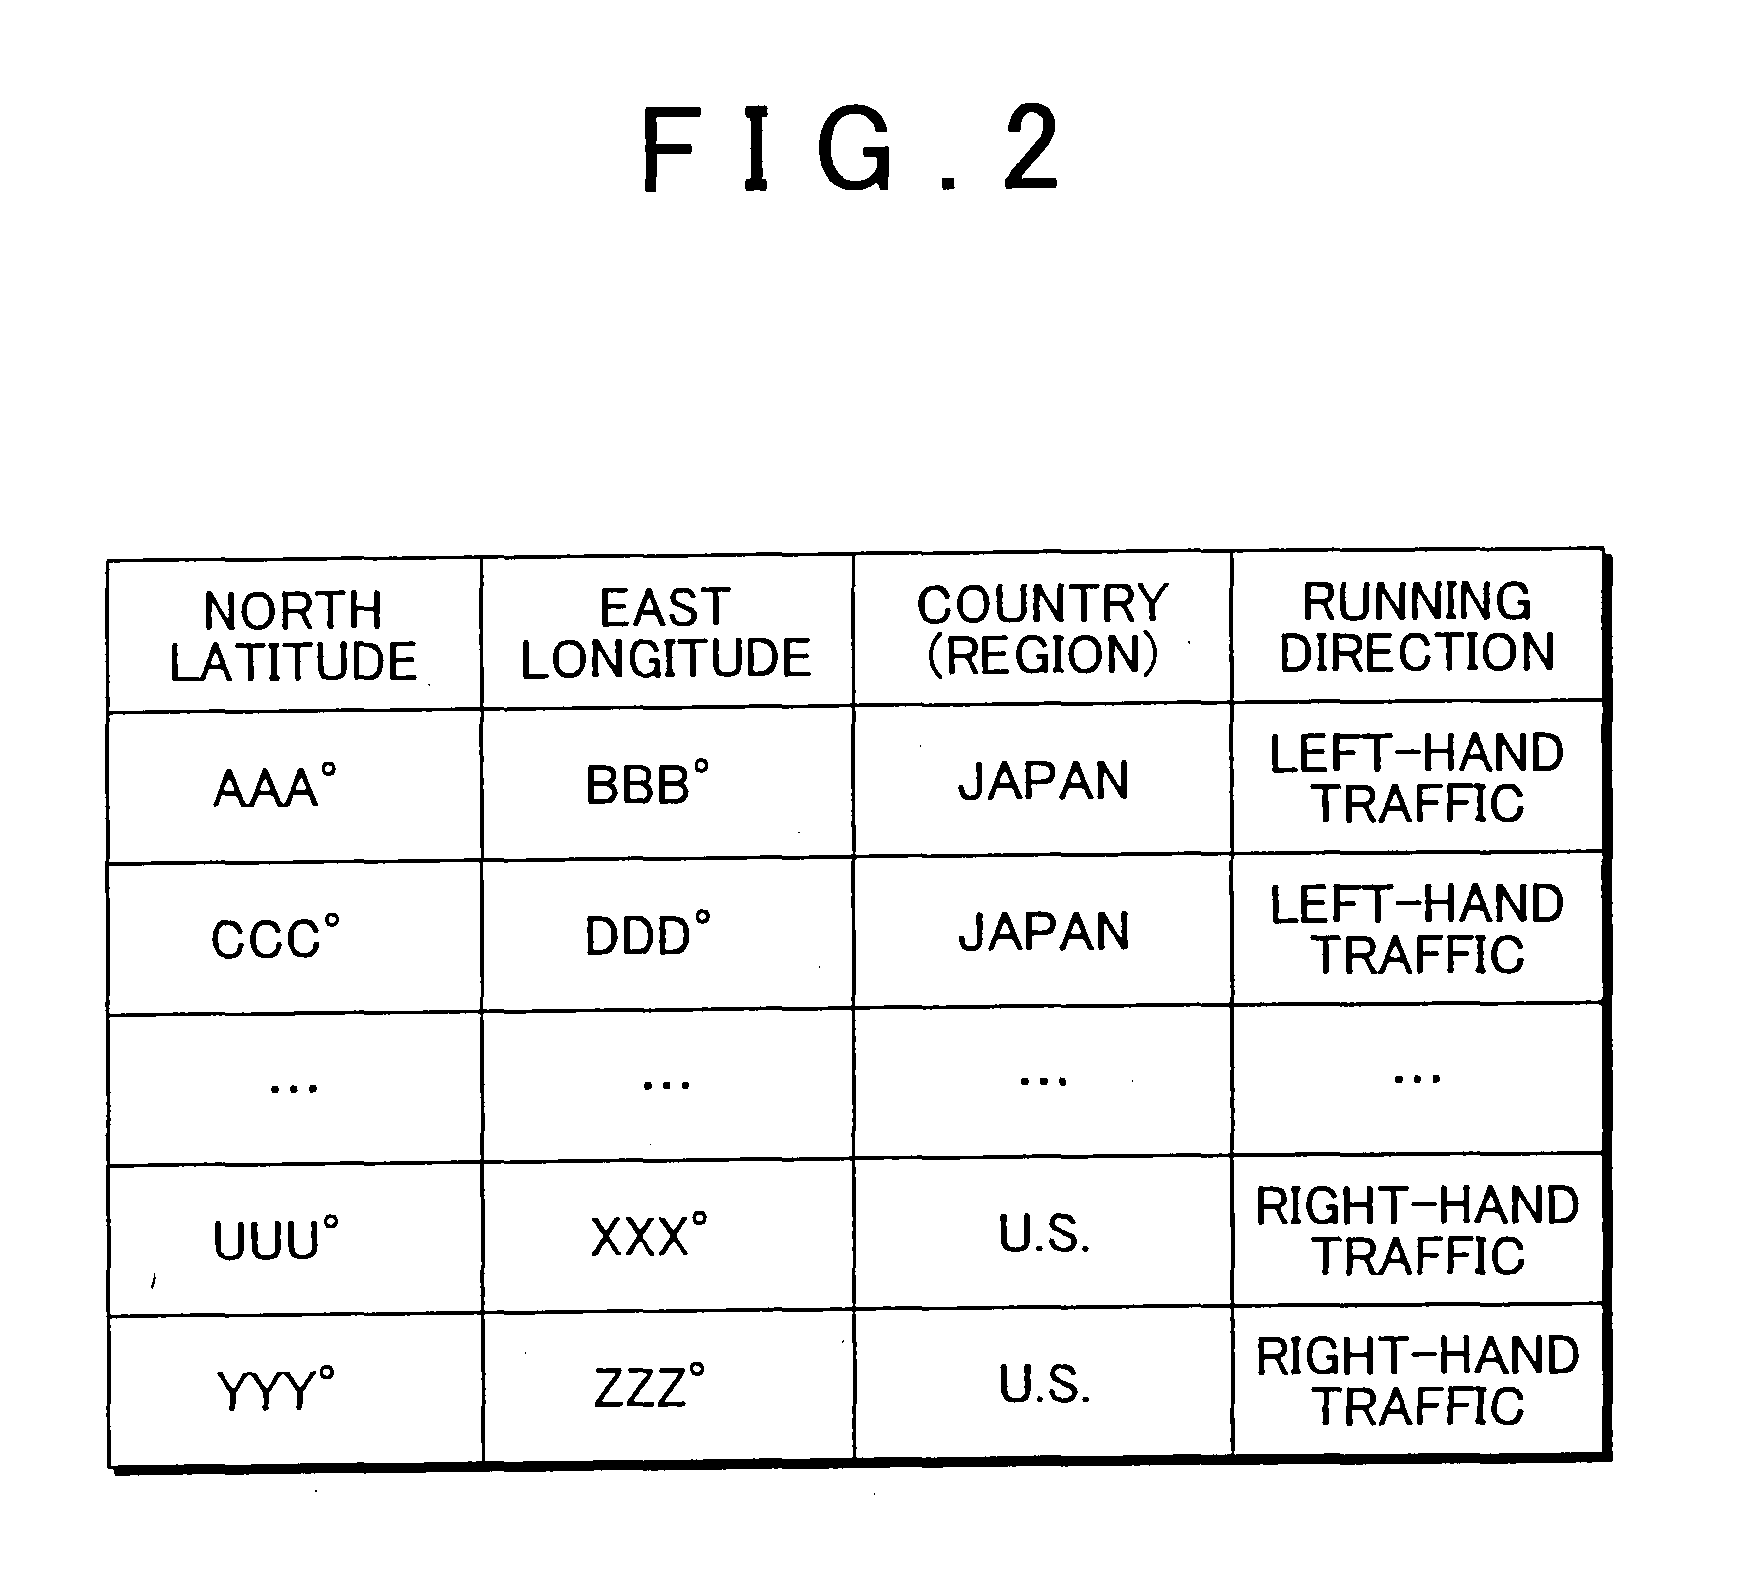 Vehicle-installed obstacle detecting system and method